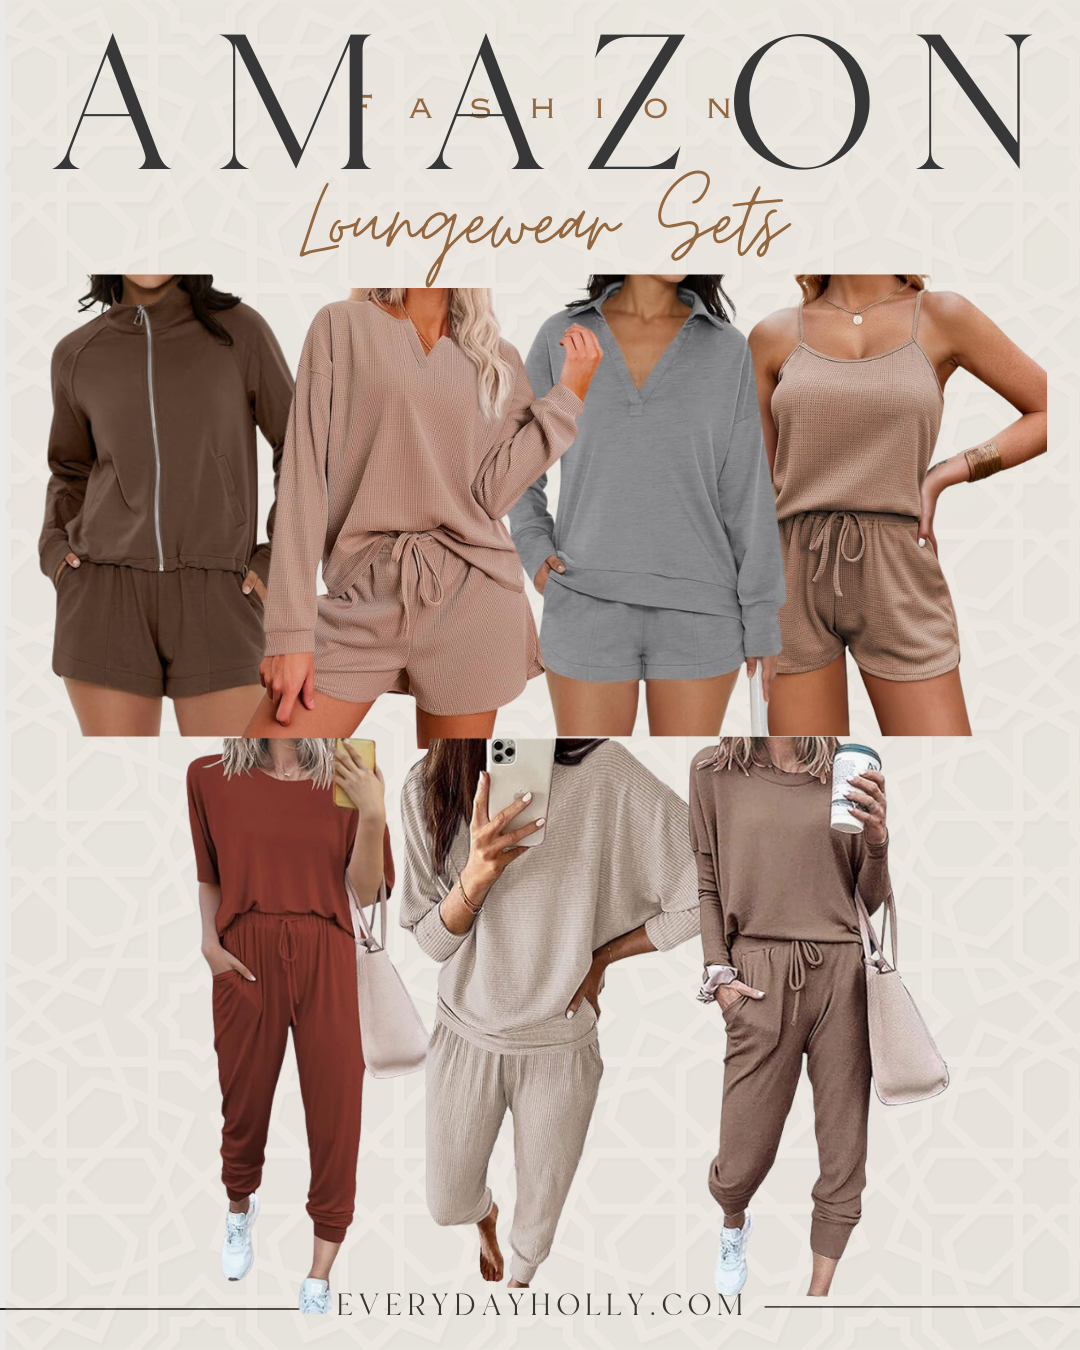 best jammies and loungewear amazon favorites | jammies, pajama sets, pajamas, loungewear, amazon, loungewear set, neutral, neutral loungewear, long sleeve, track suit